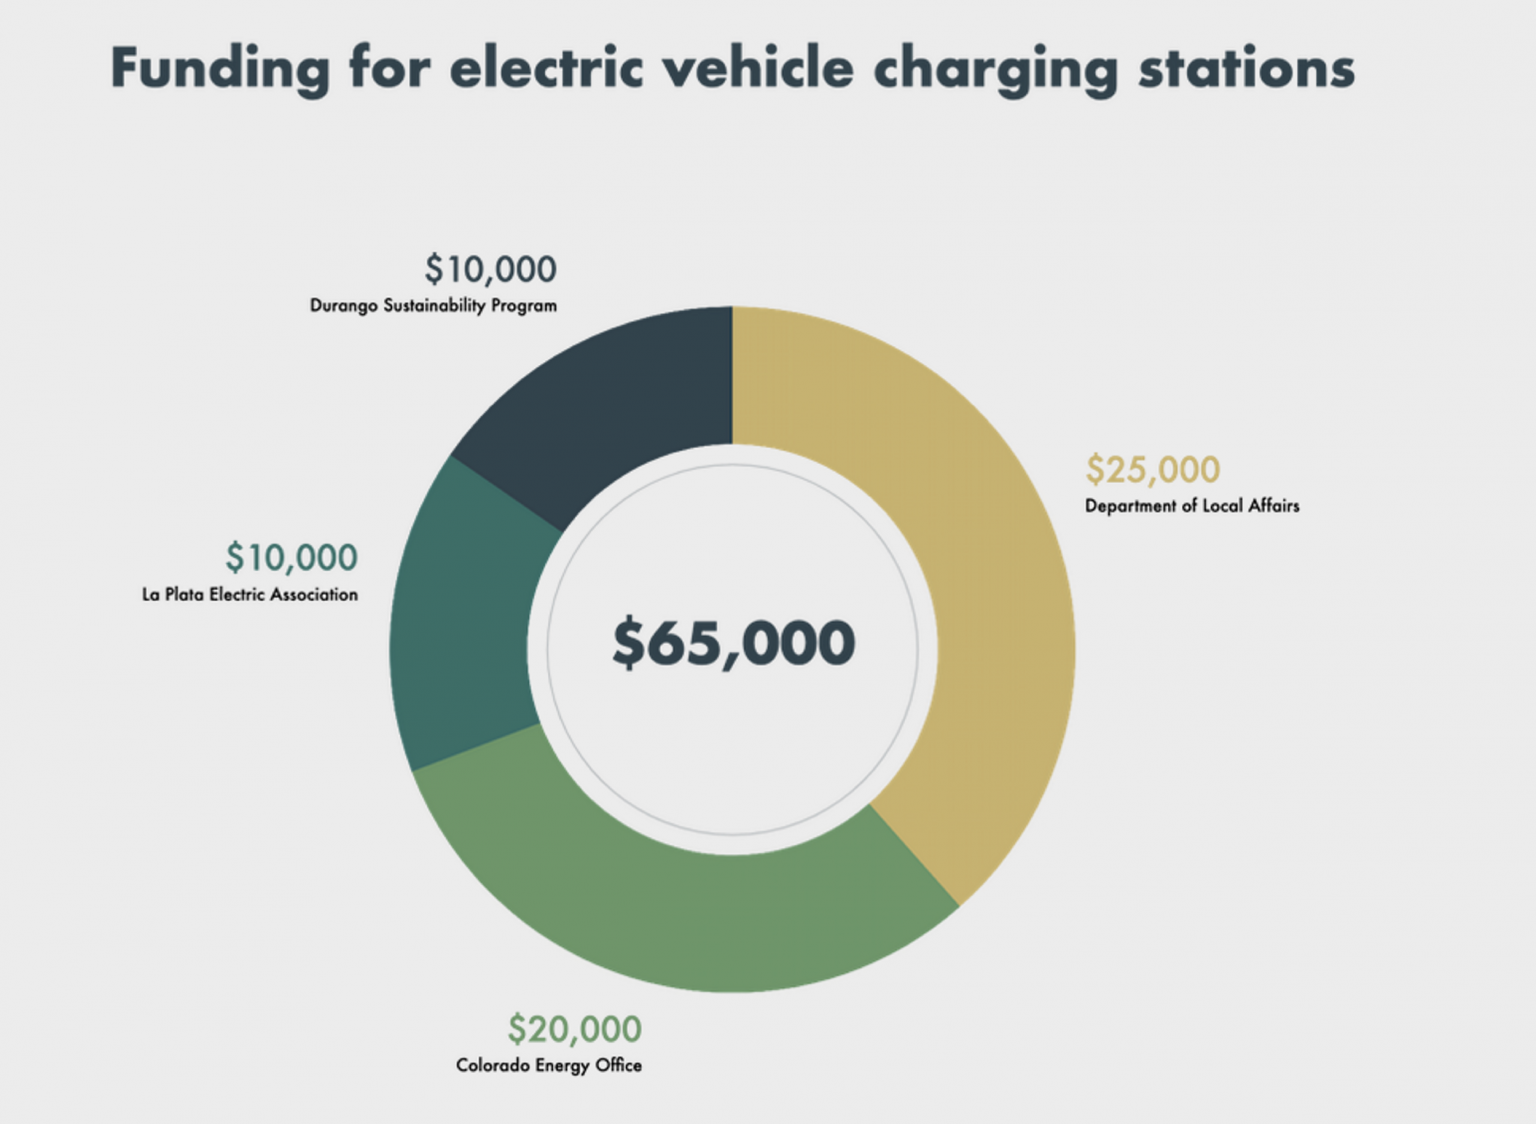 Durango receives grant funding to build electric vehicle charging stations